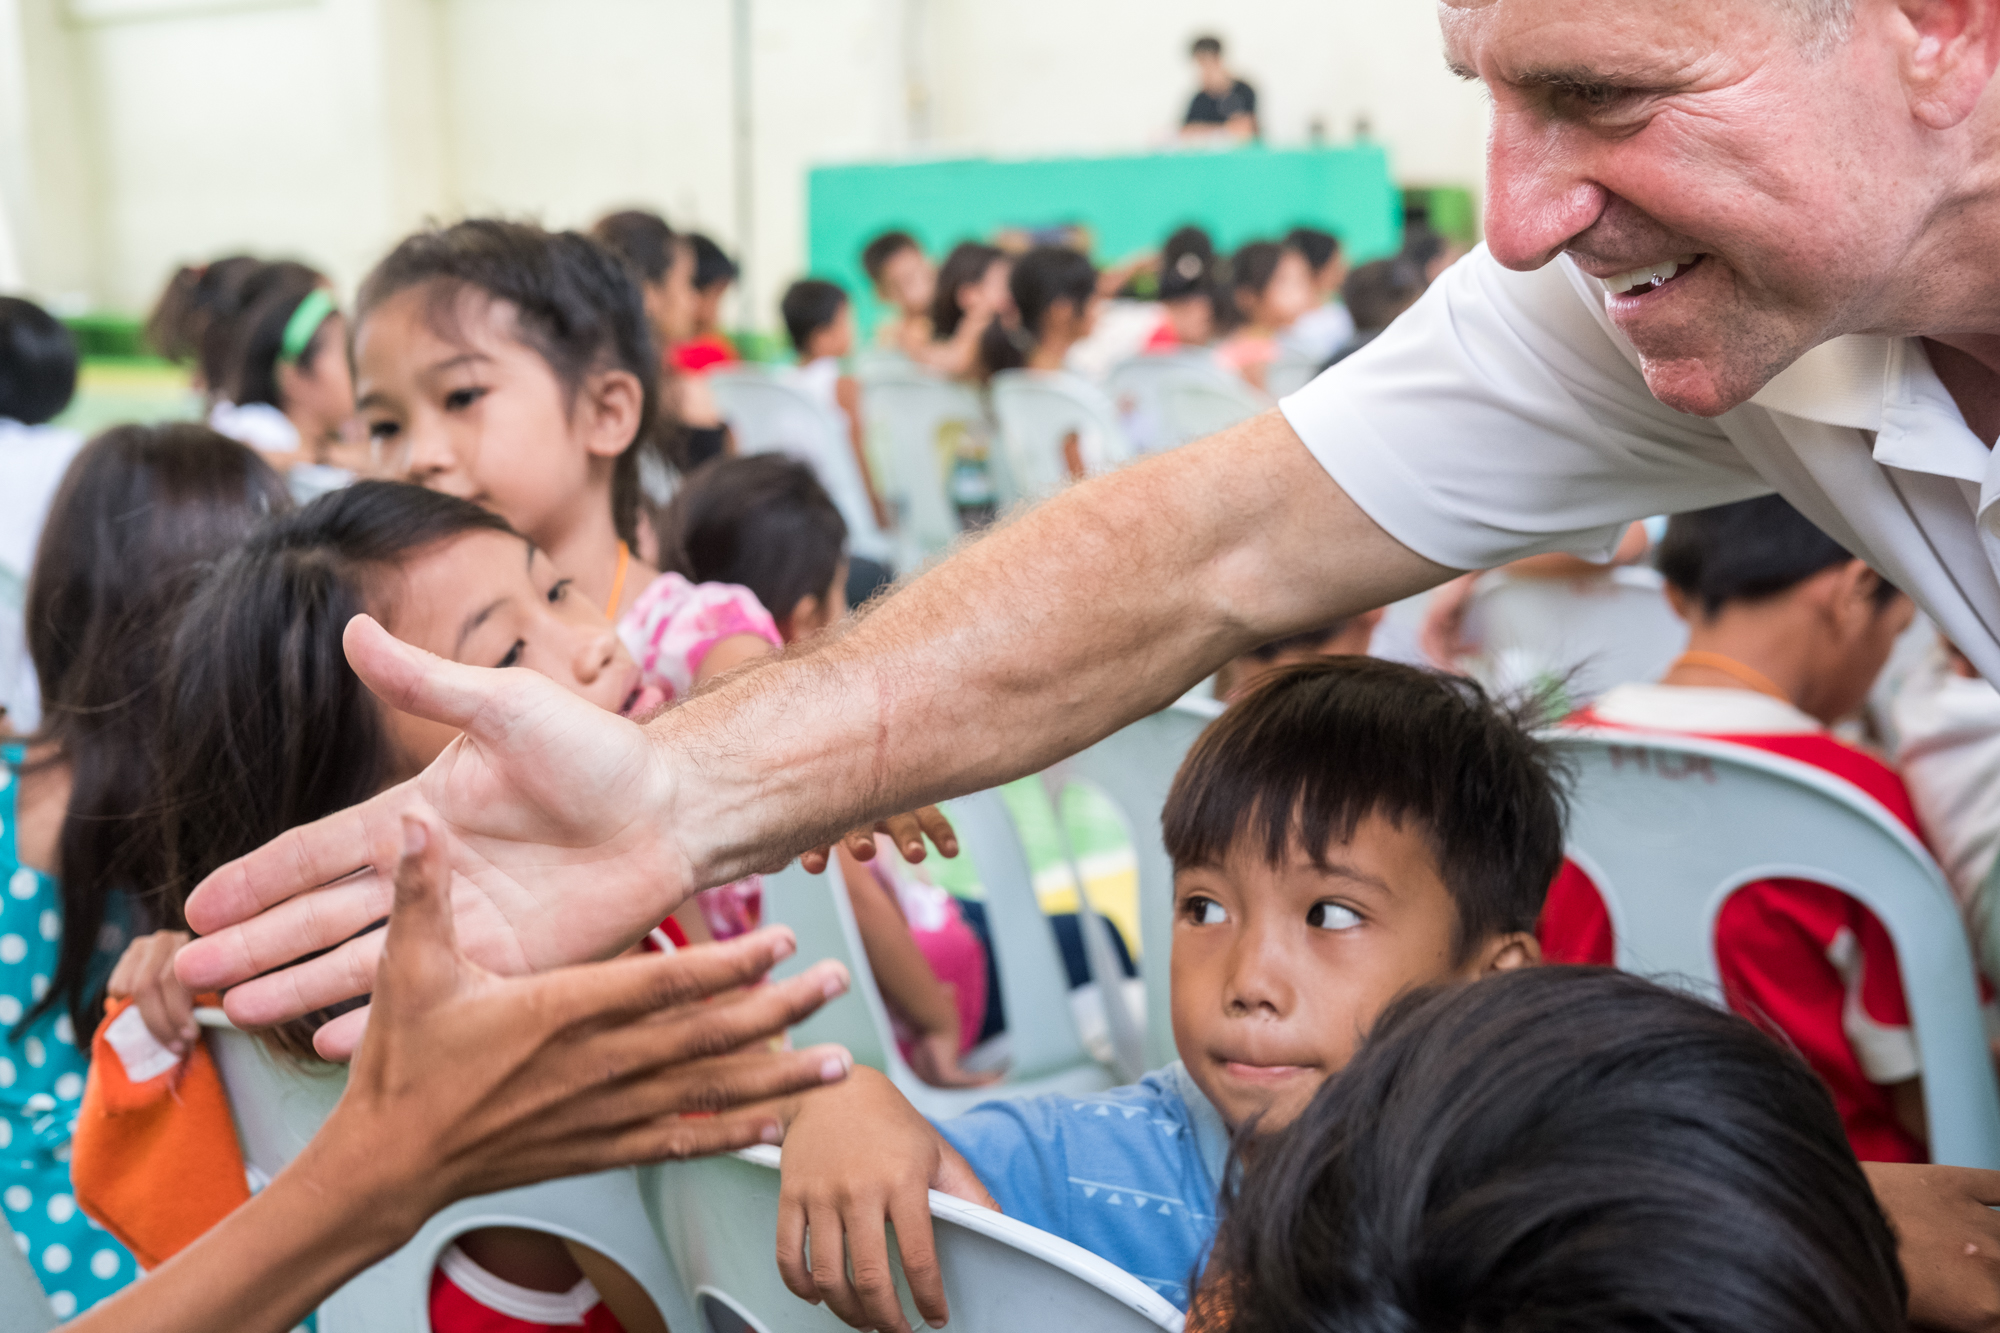  Frank Becker (right) greets children attending a community-giving event in Cebu, Philippines. During the event, Frank and local organizations include fun activities and games for the children. 